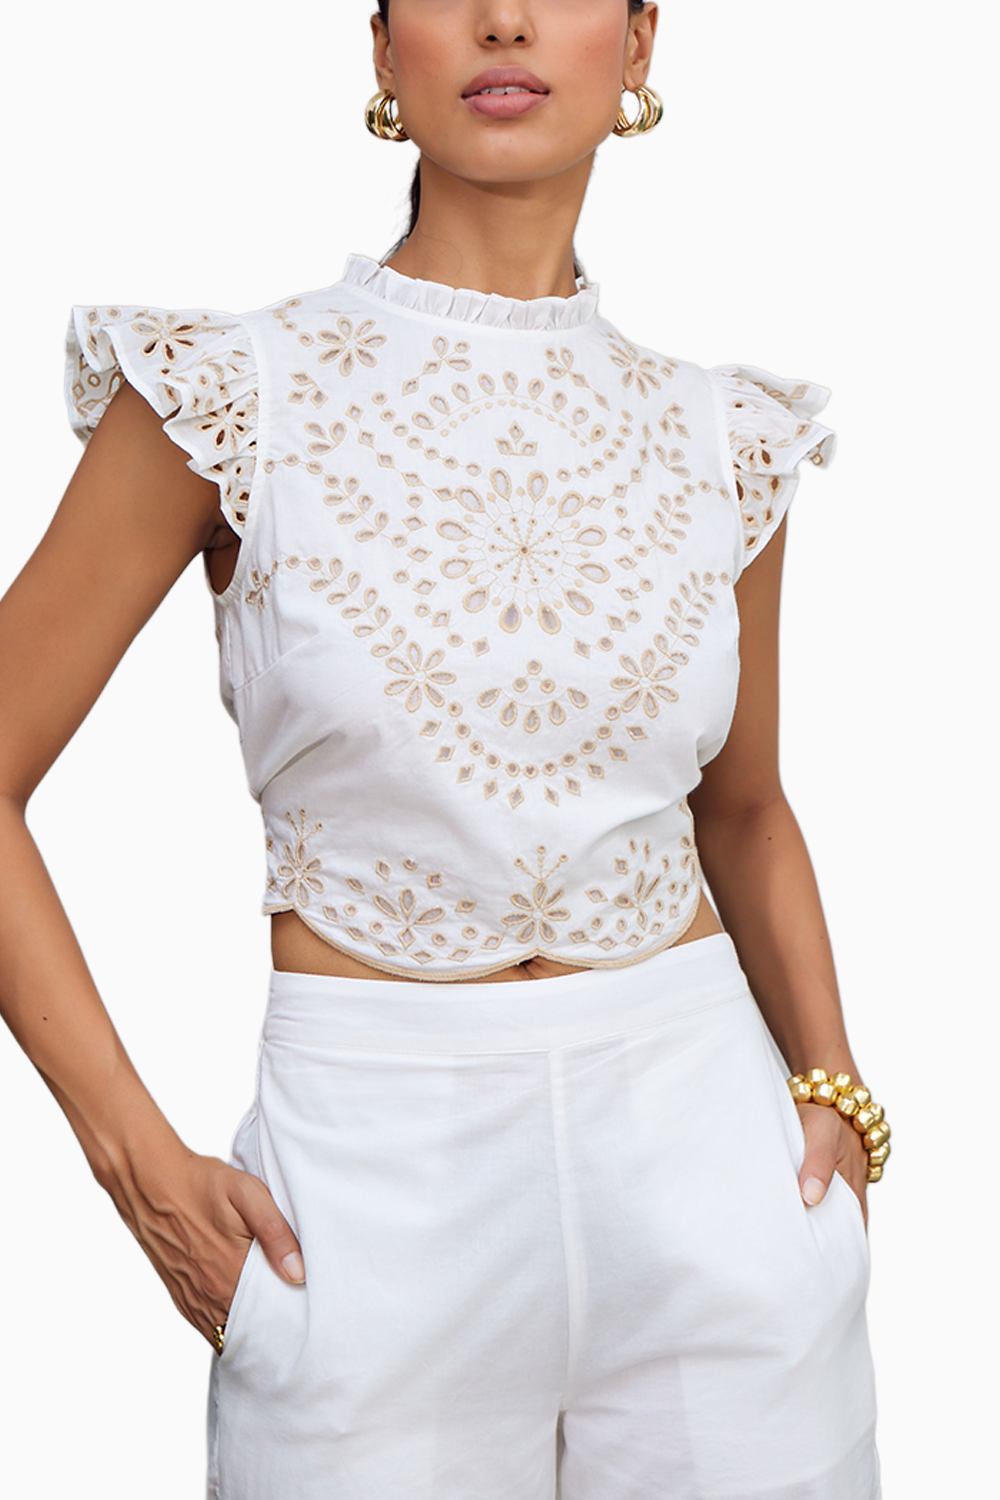 Romneya White Embroidered Top